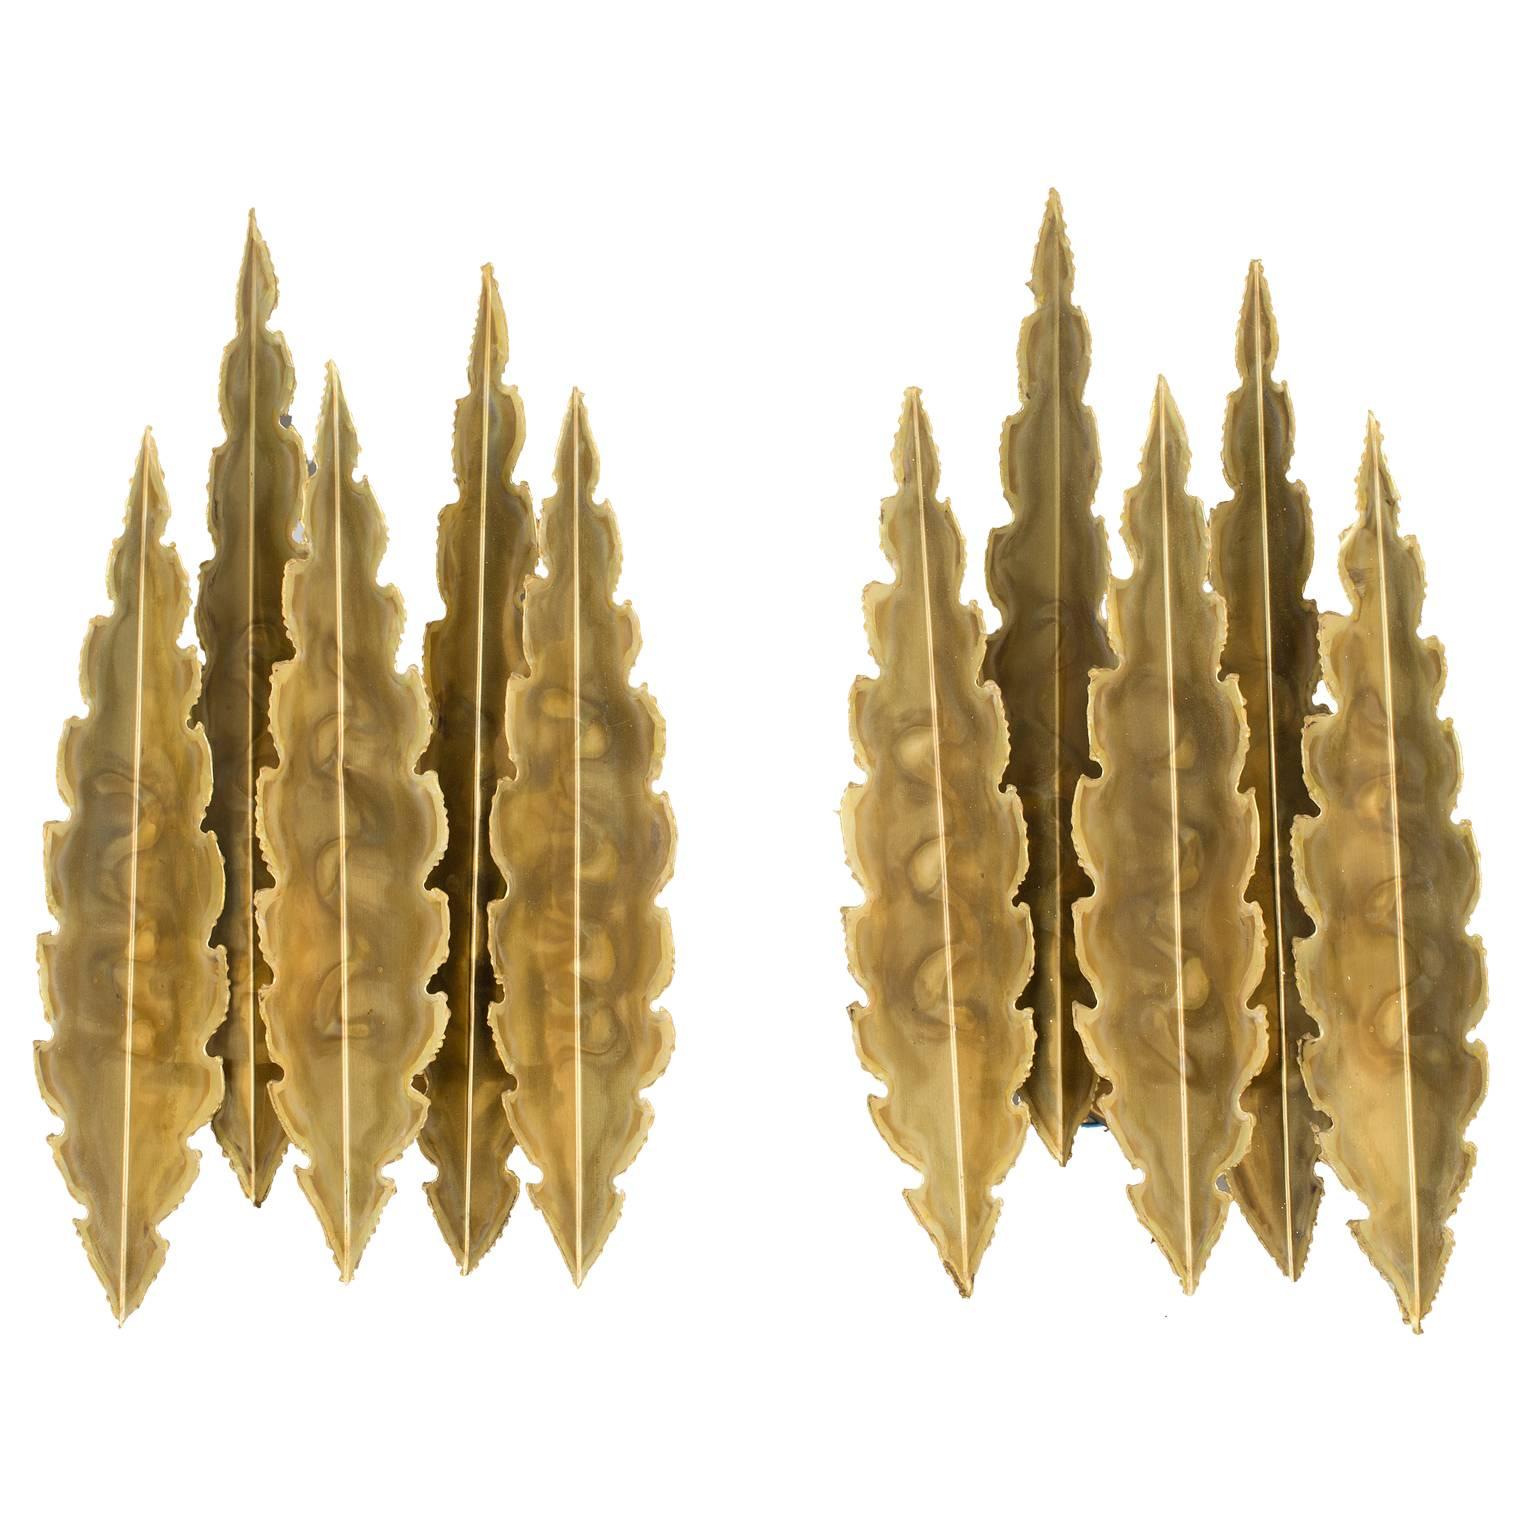 Pair of Brutalist Wall Lights 'Scones' by Holm Sorensen For Sale